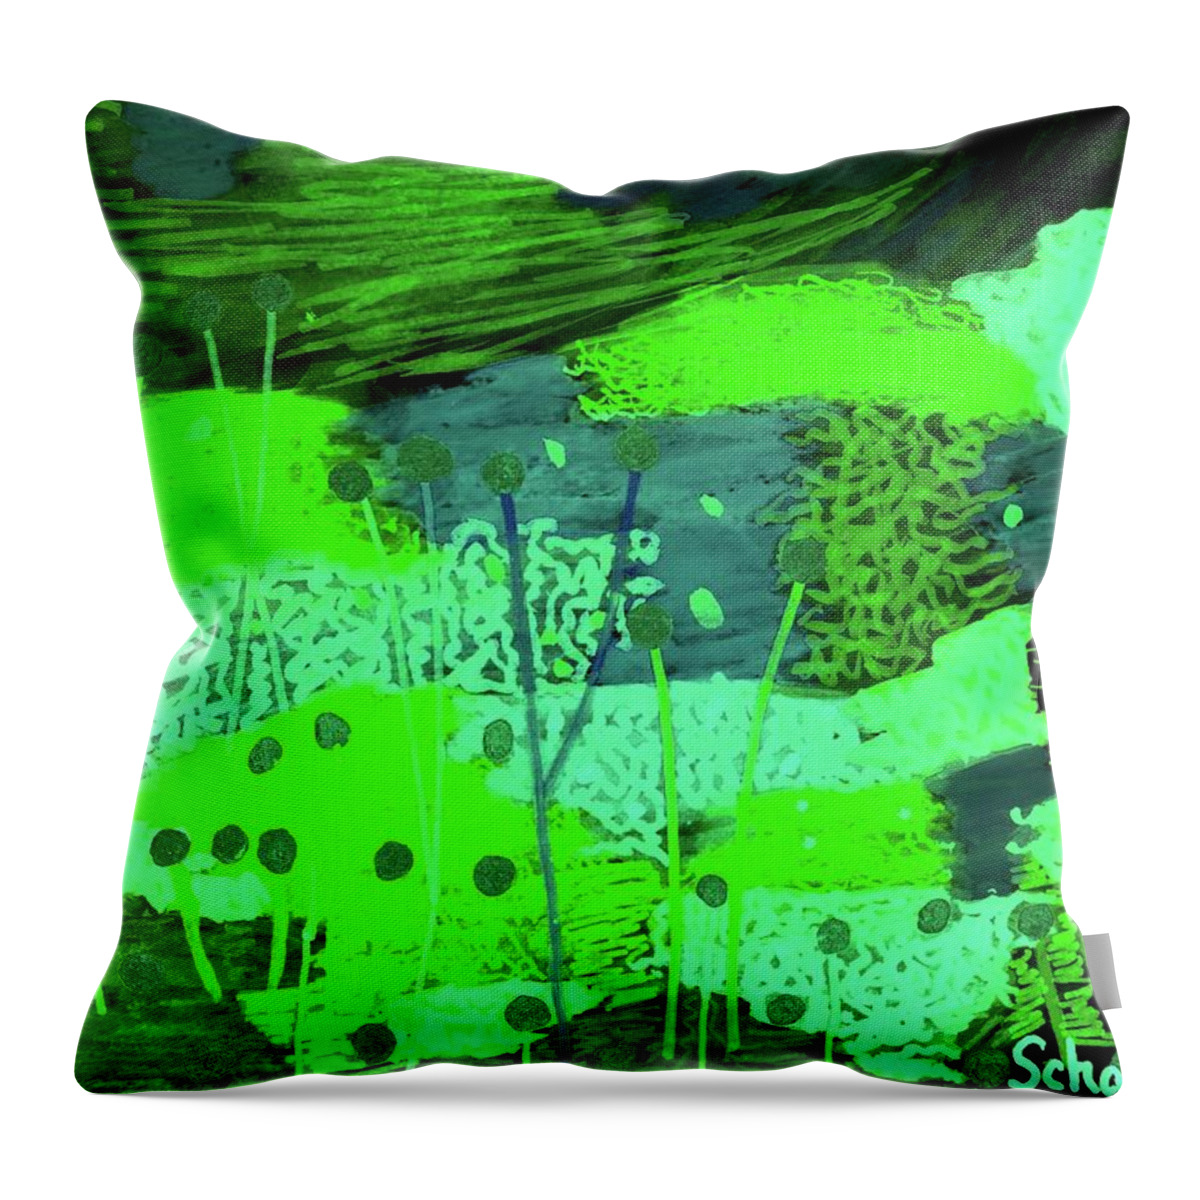 Original Painting Throw Pillow featuring the painting Variation And Insight by Susan Schanerman